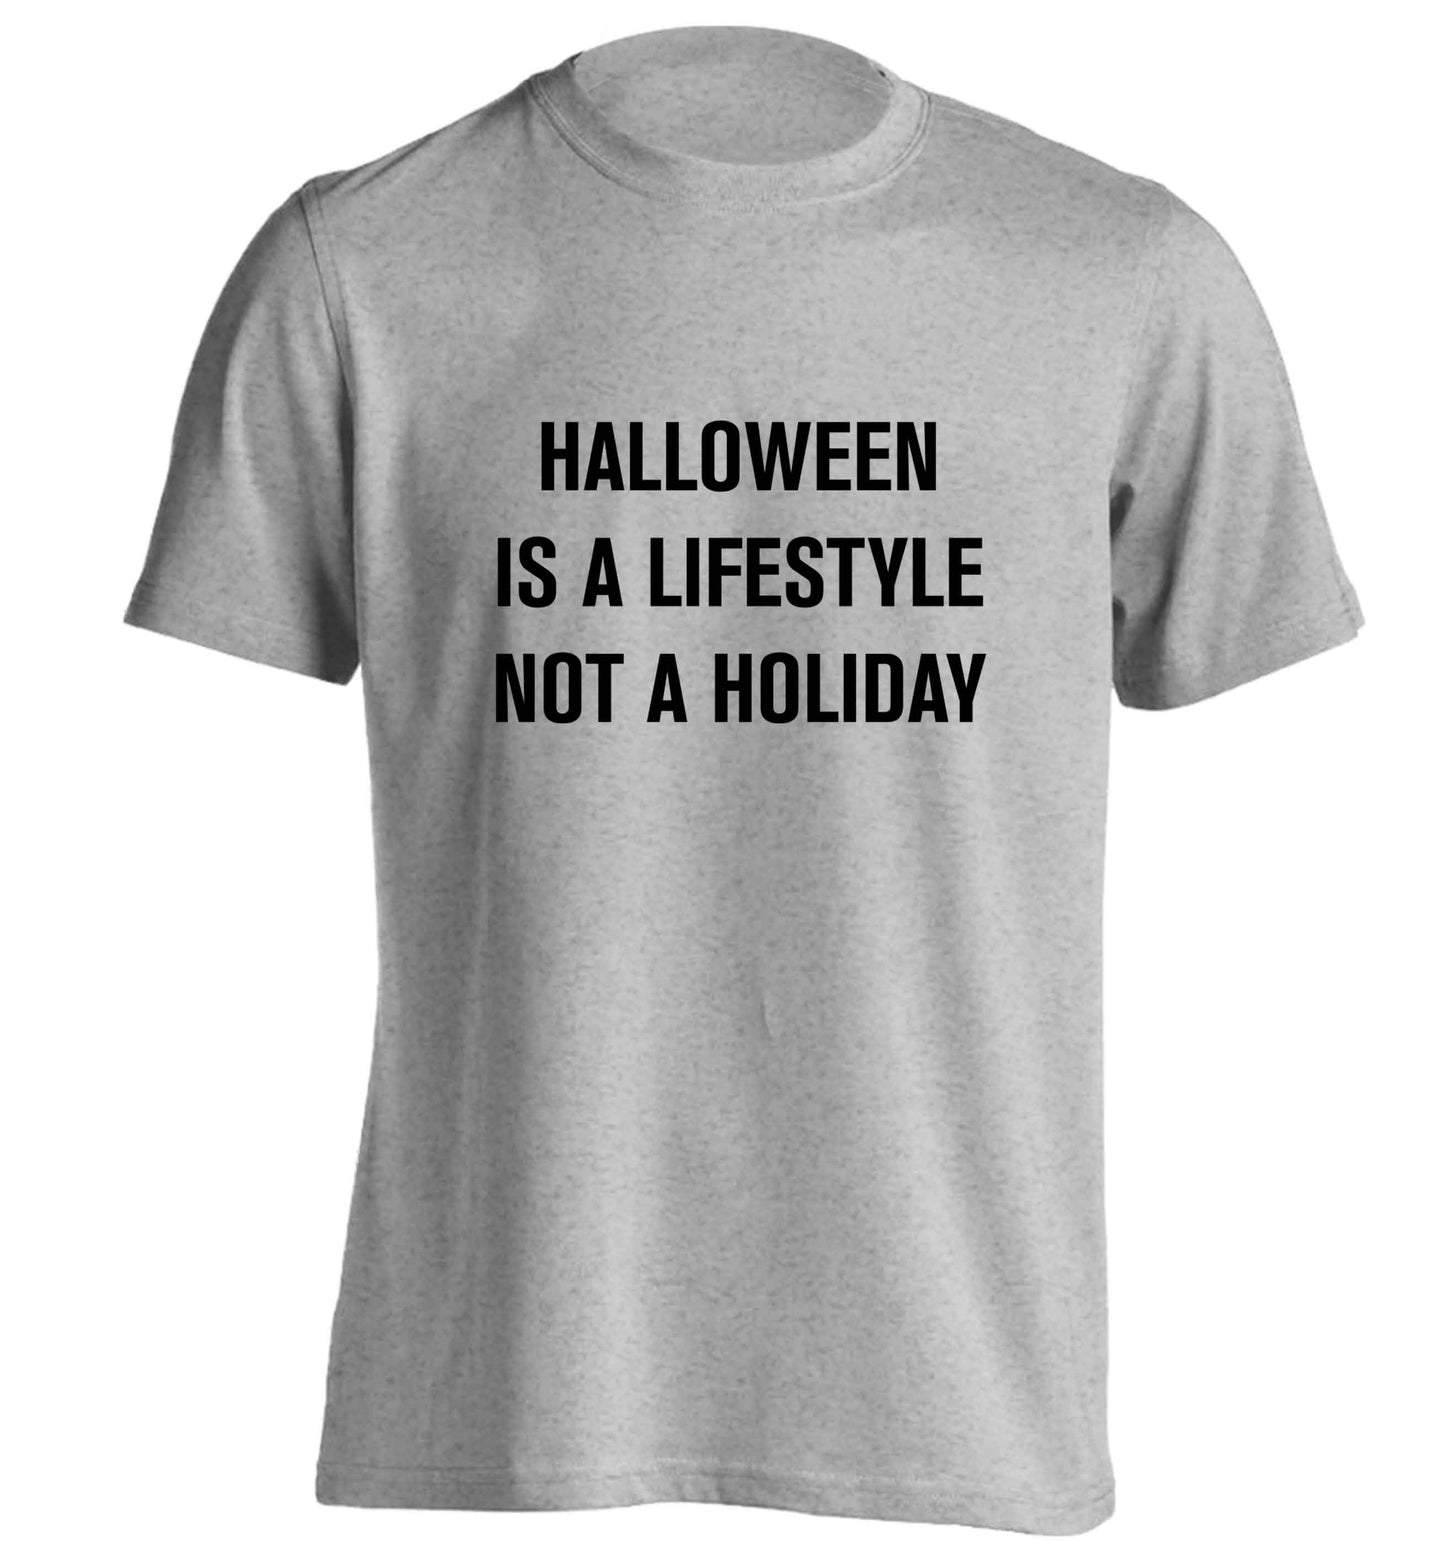 Halloween is a lifestyle not a holiday adults unisex grey Tshirt 2XL